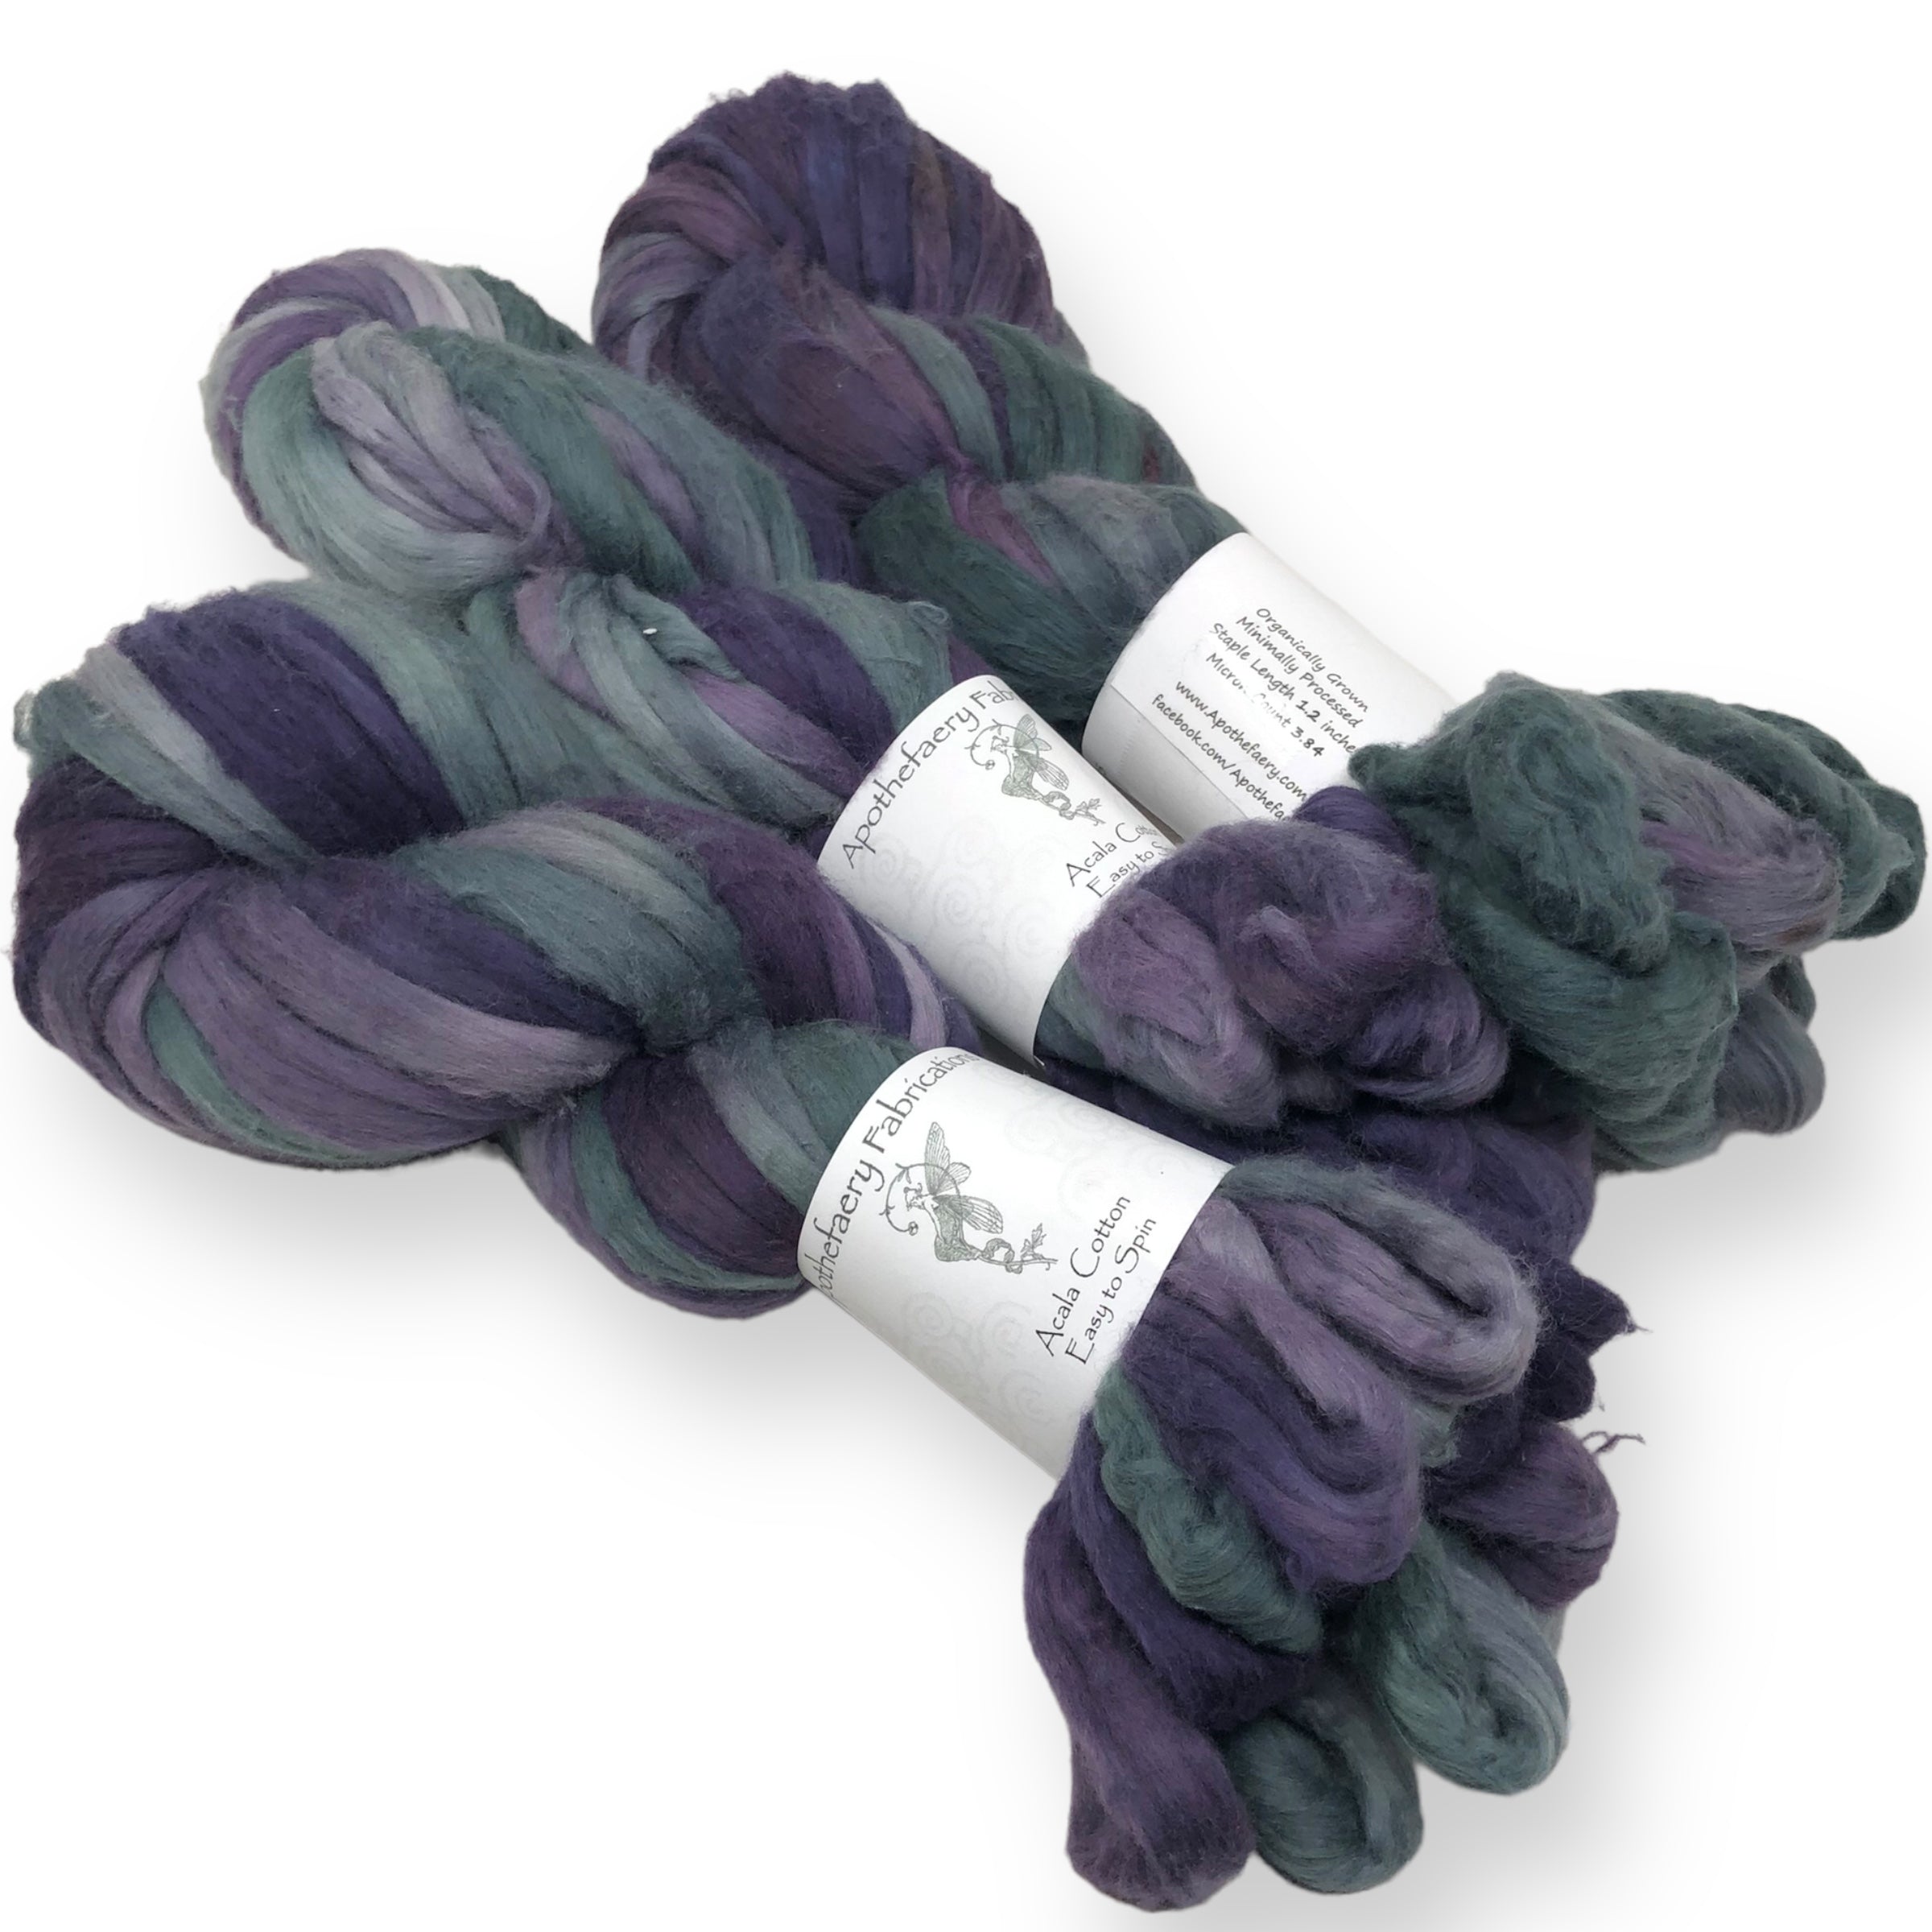 Ice Dyed Acala - "Easy to Spin" USA grown Cotton